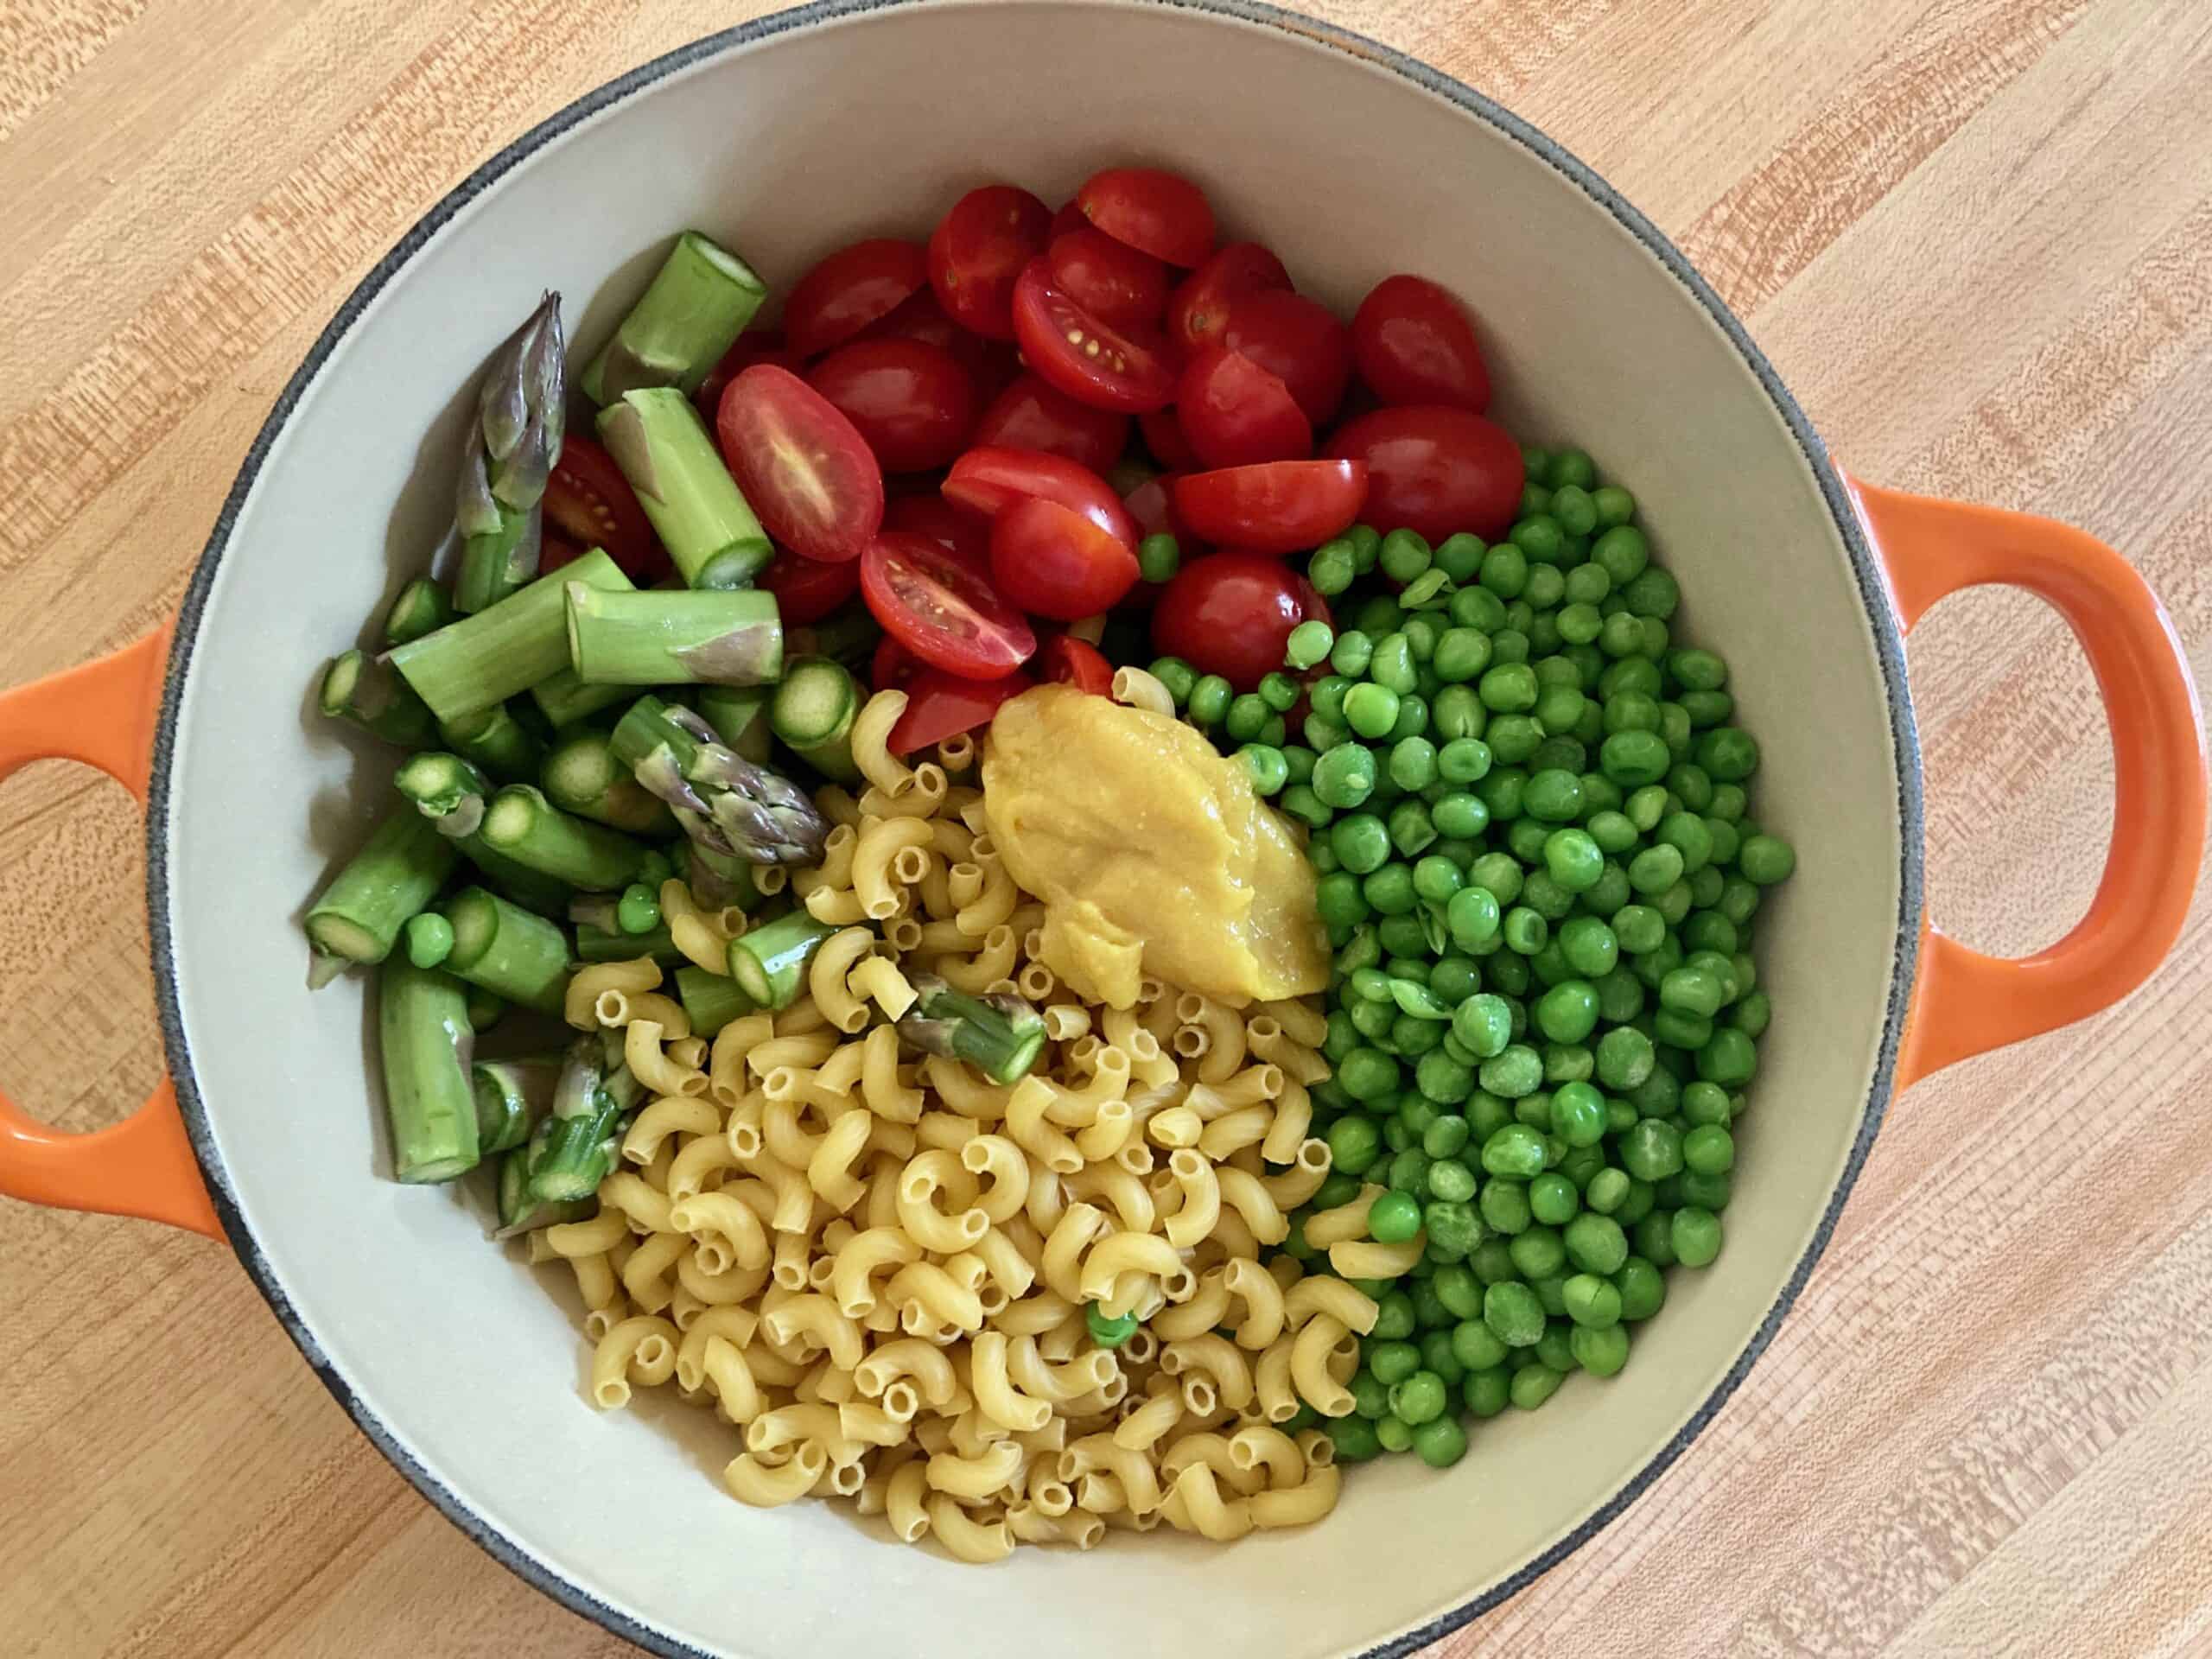 Chopped asparagus, diced tomatoes, elbow macaroni, peas, and better-than-bouillon paste in an enameled cast-iron soup pot, shot from above.